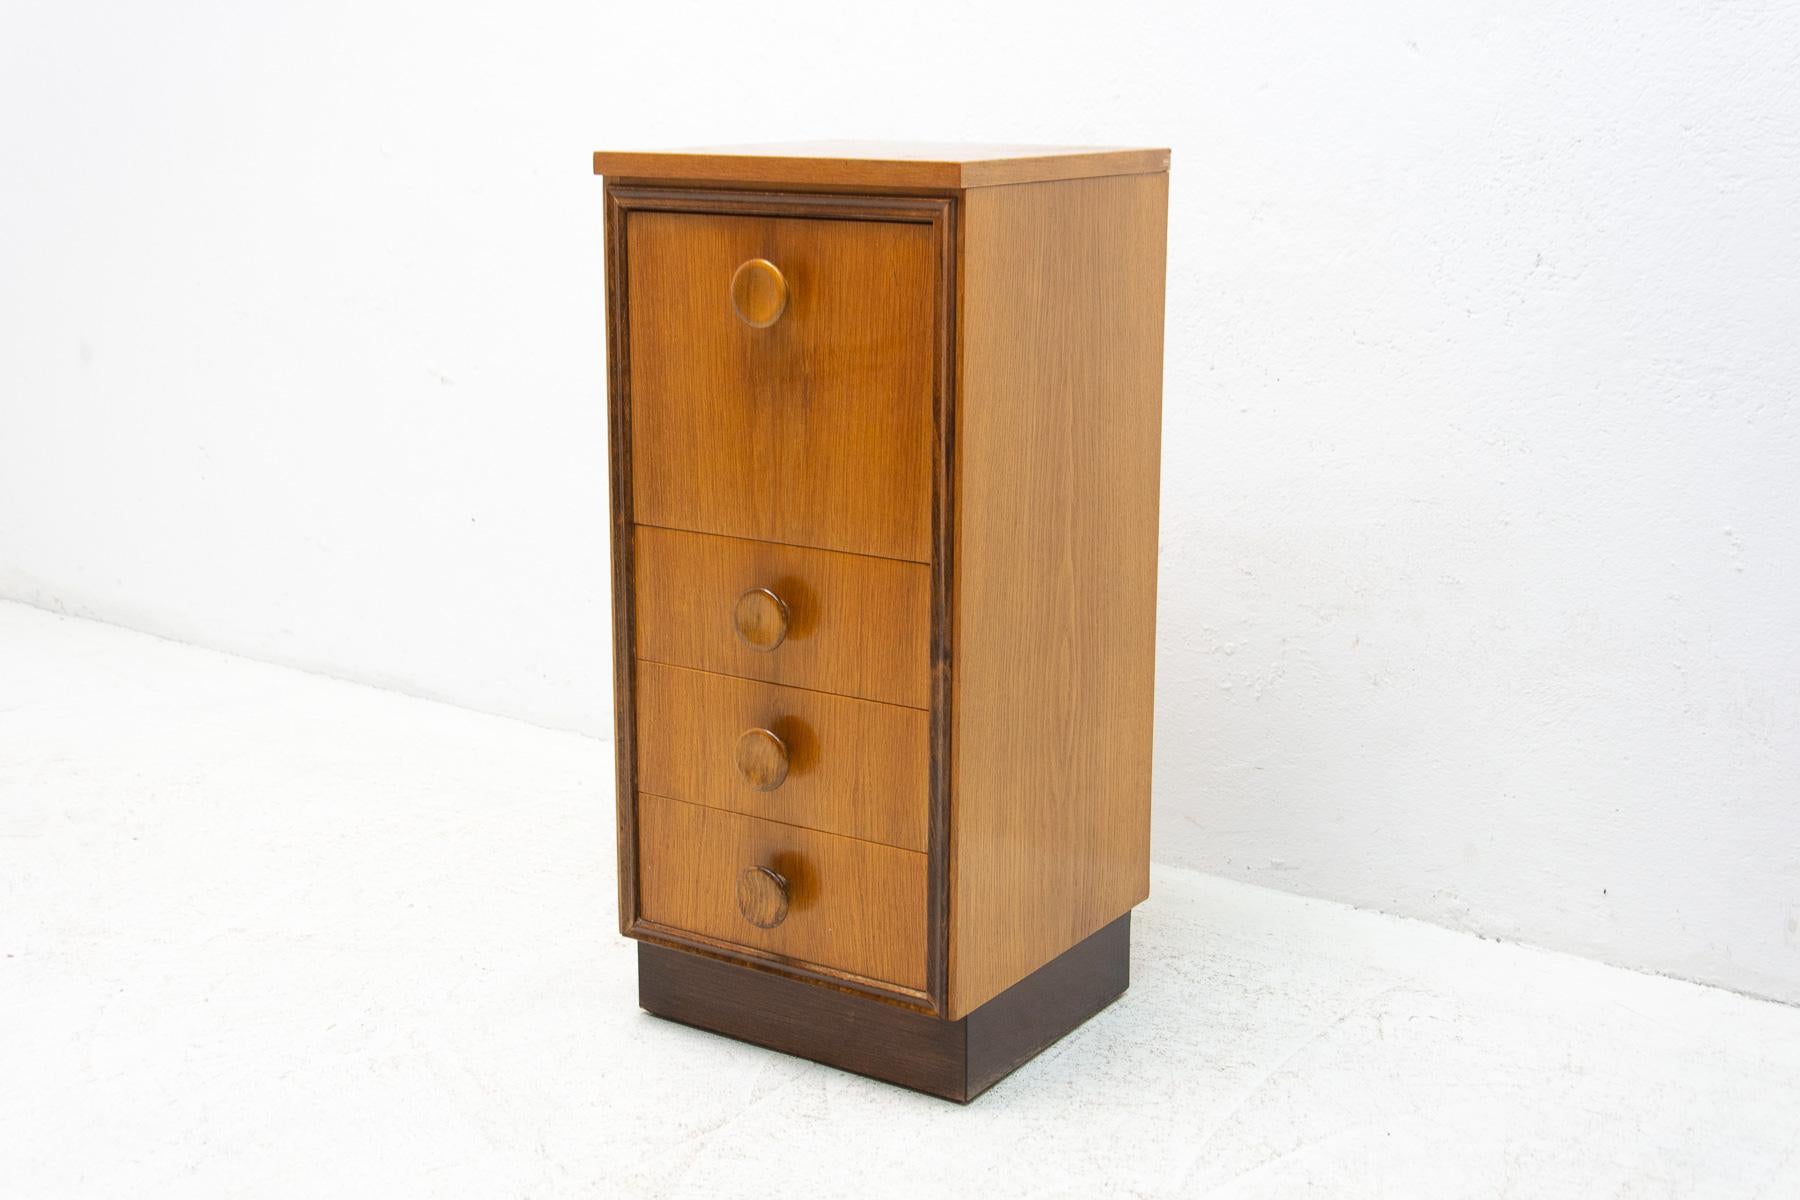 This small chest of drawers in the shape of a chimney was made by UP Závody in the former Czechoslovakia in 1958. It’s made of oak wood. It has three drawers and a storage space.
In very good vintage condition, shows slight signs of age and